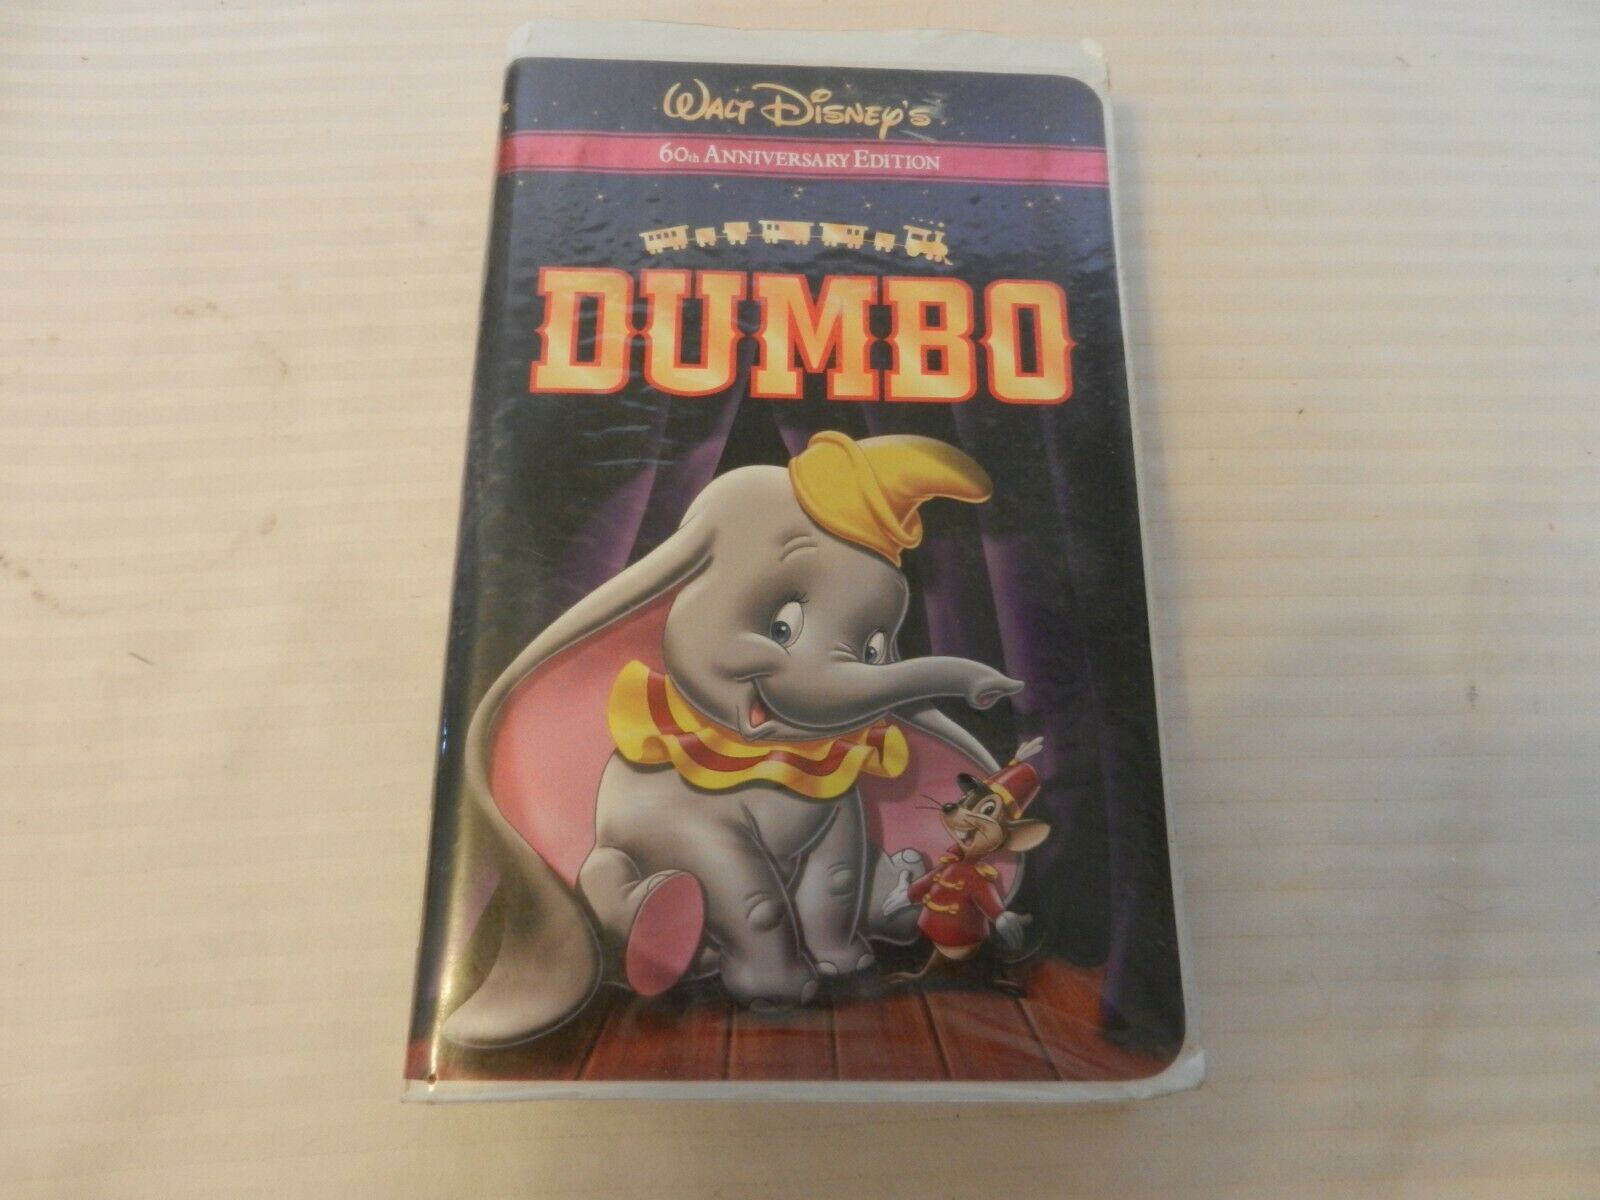 Dumbo (VHS, 2001, 60th Anniversary Edition) Clam Shell - VHS Tapes